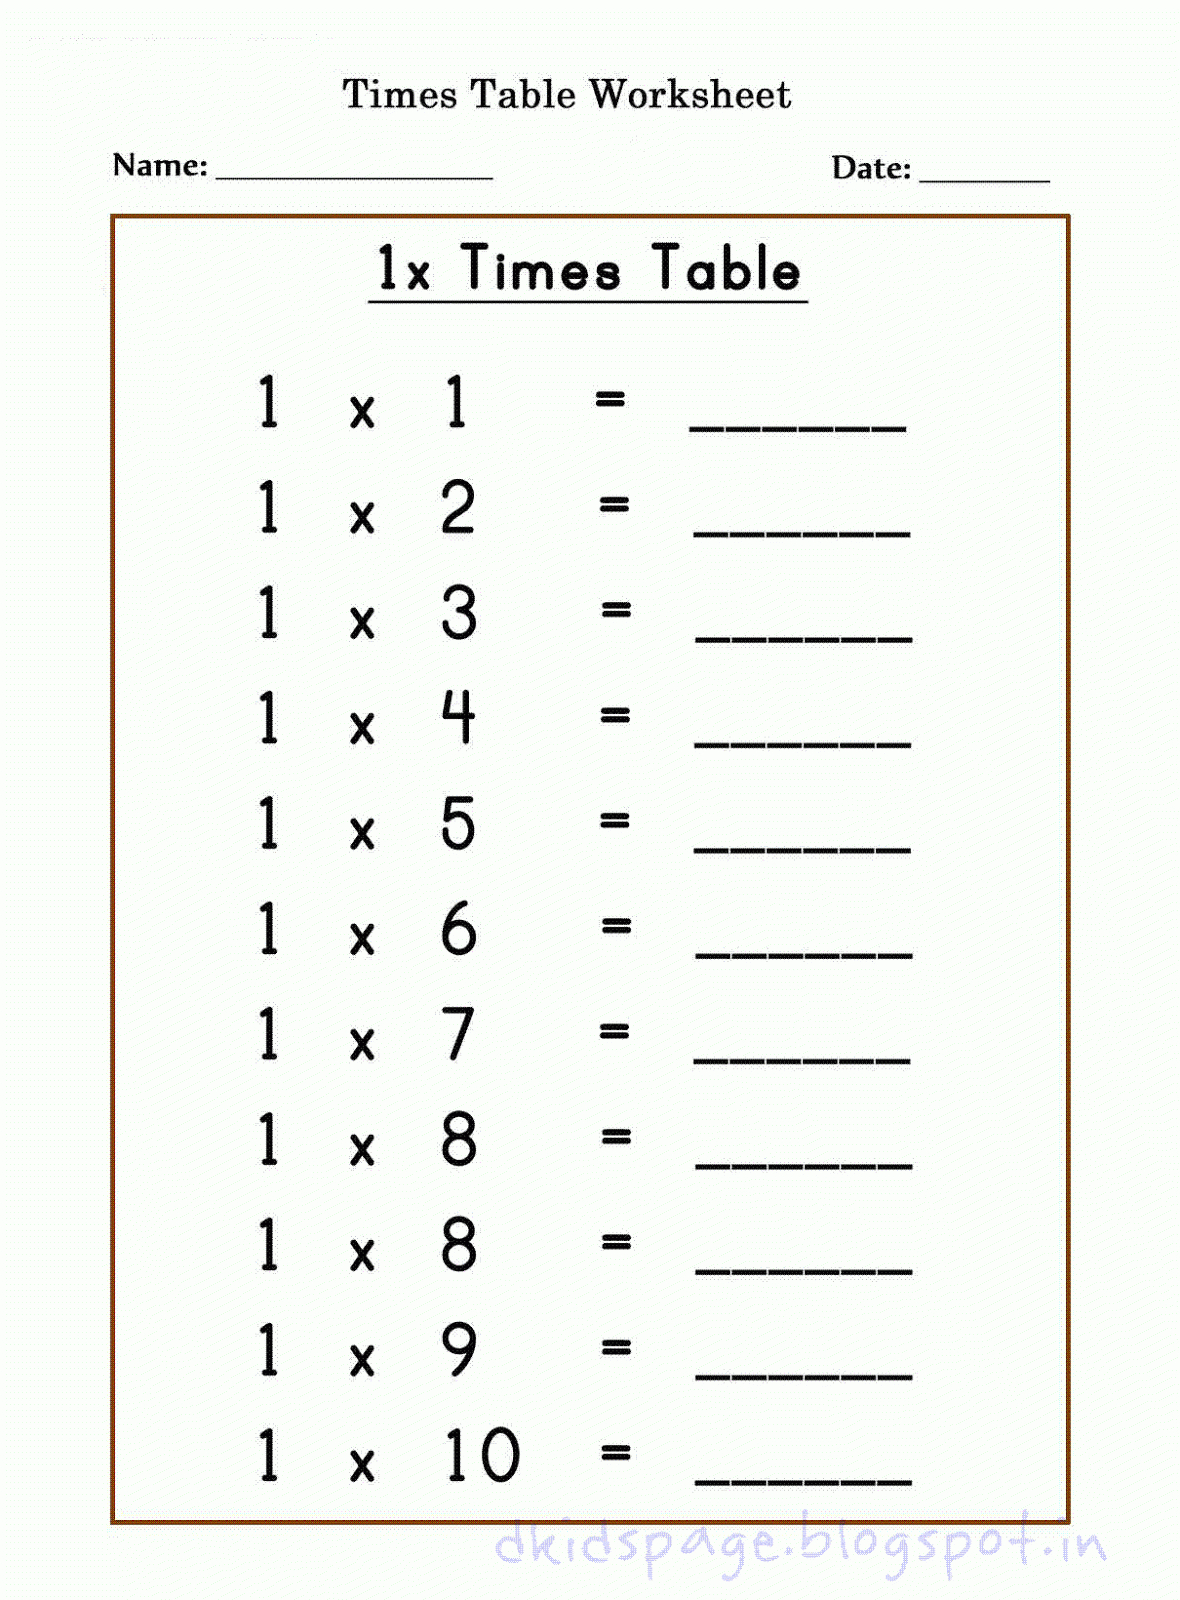 multiplication-worksheets-6-and-7-times-tables-printable-multiplication-flash-cards